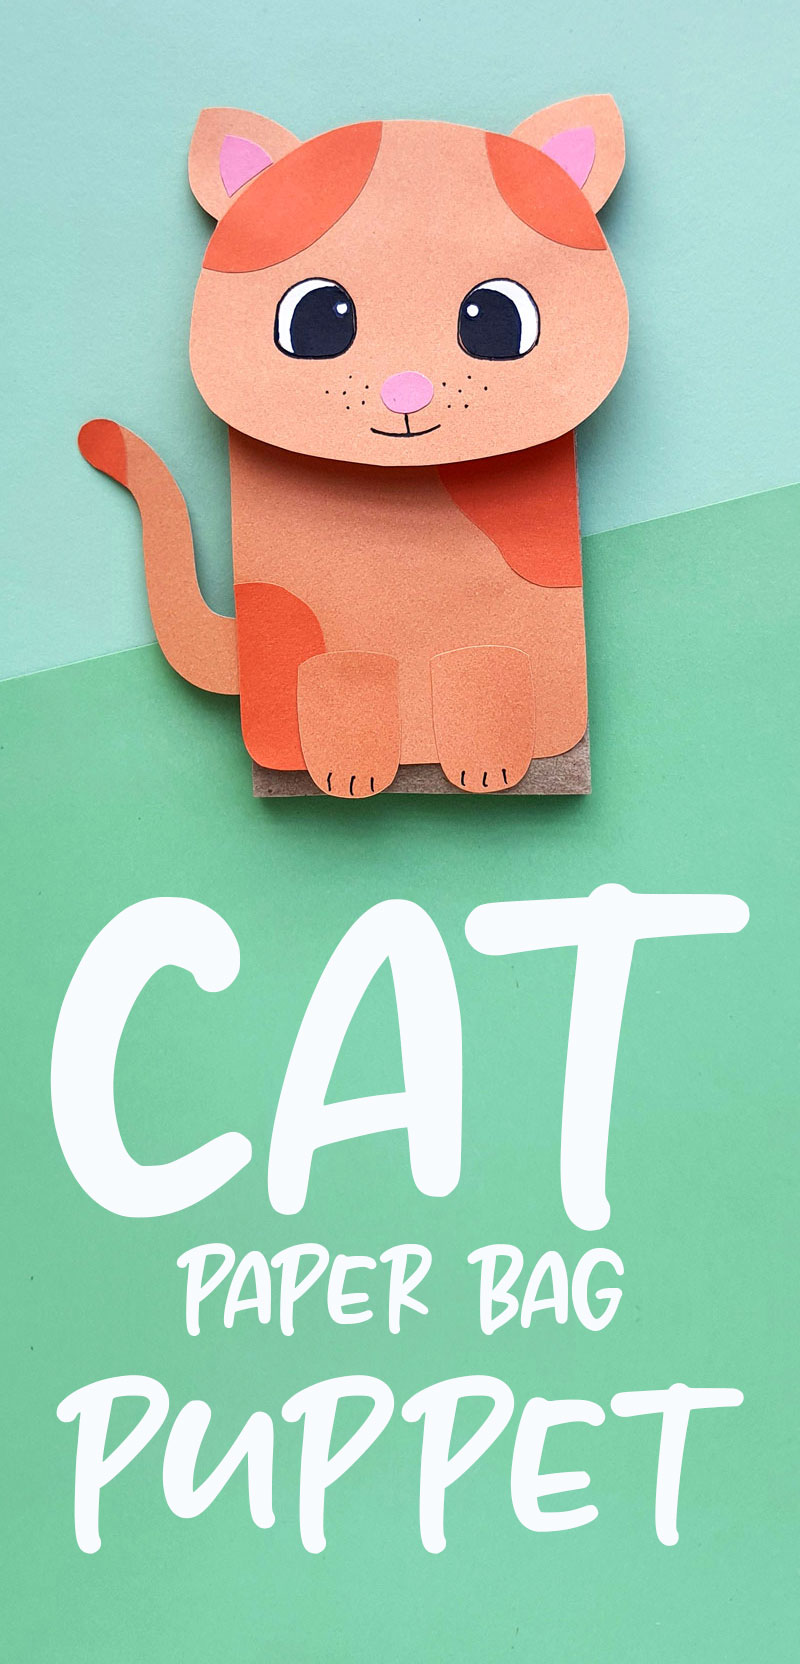 cat paper bag puppet title image with text